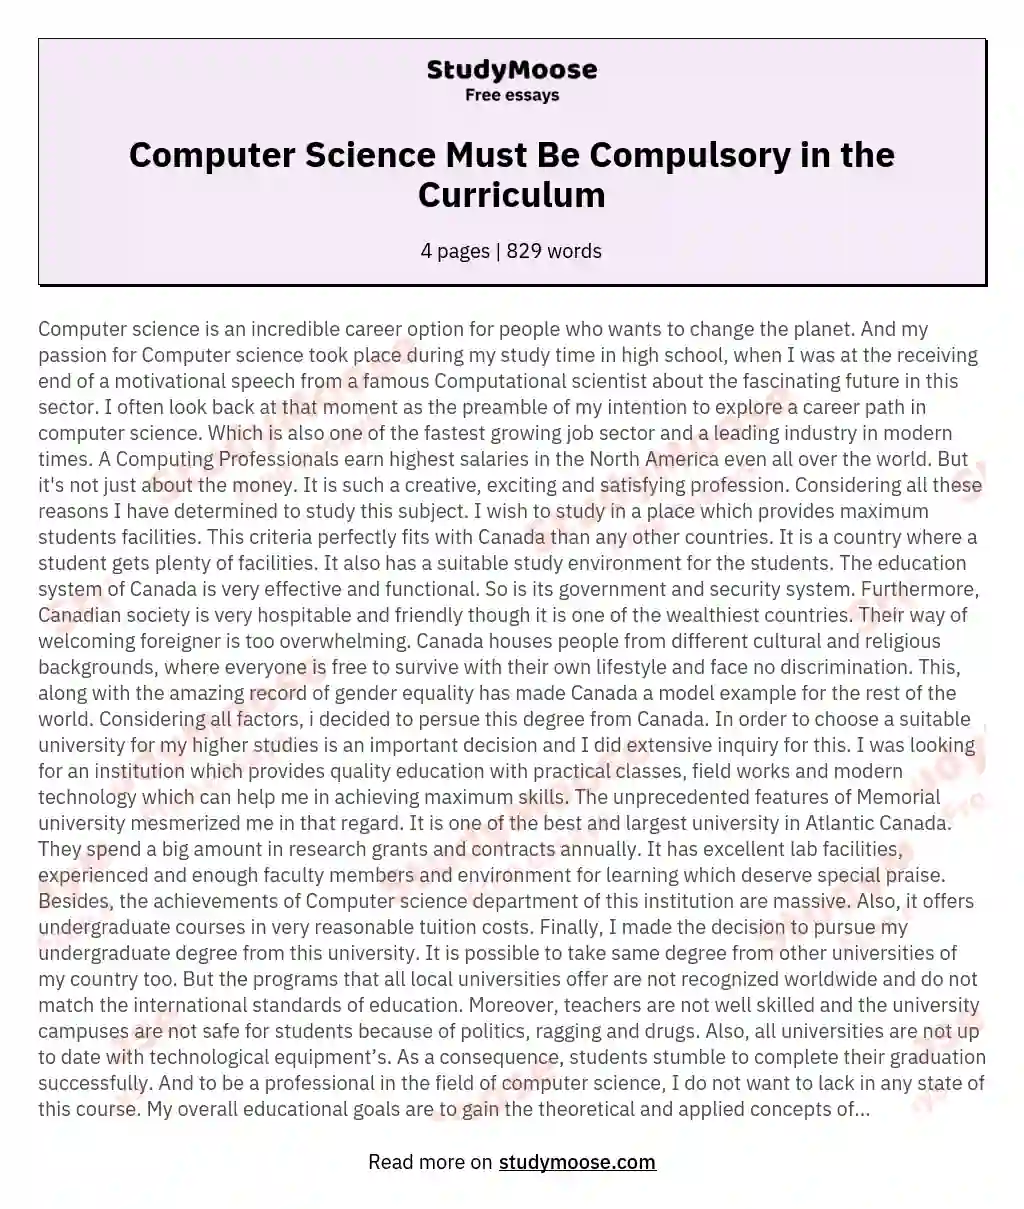 Computer Science Must Be Compulsory in the Curriculum essay